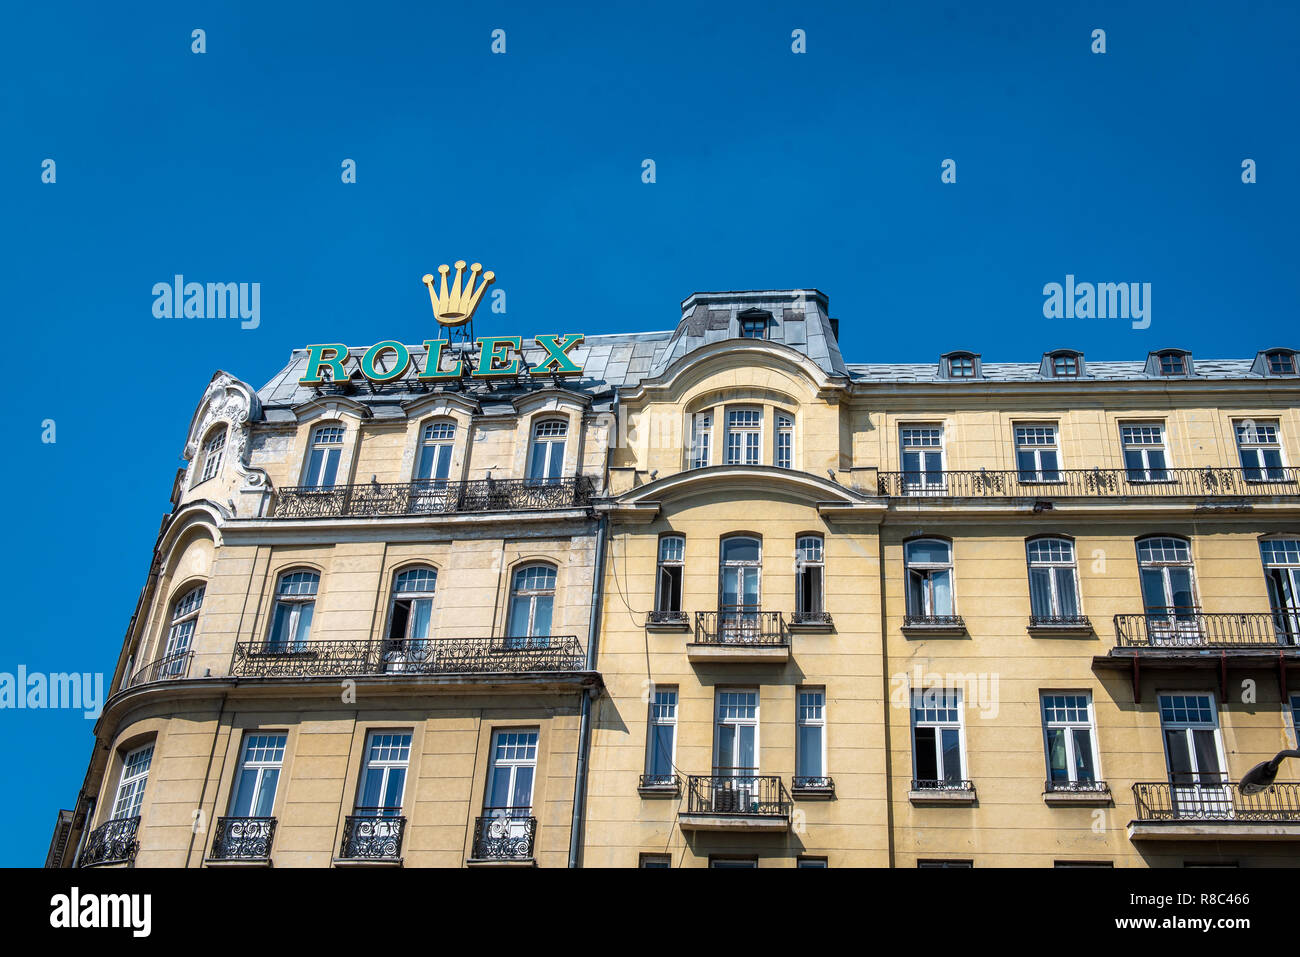 A giant Rolex sign hangs atop a building, an indication of western culture and commercialization spreading to the former communist block,  Warsaw, Mas Stock Photo